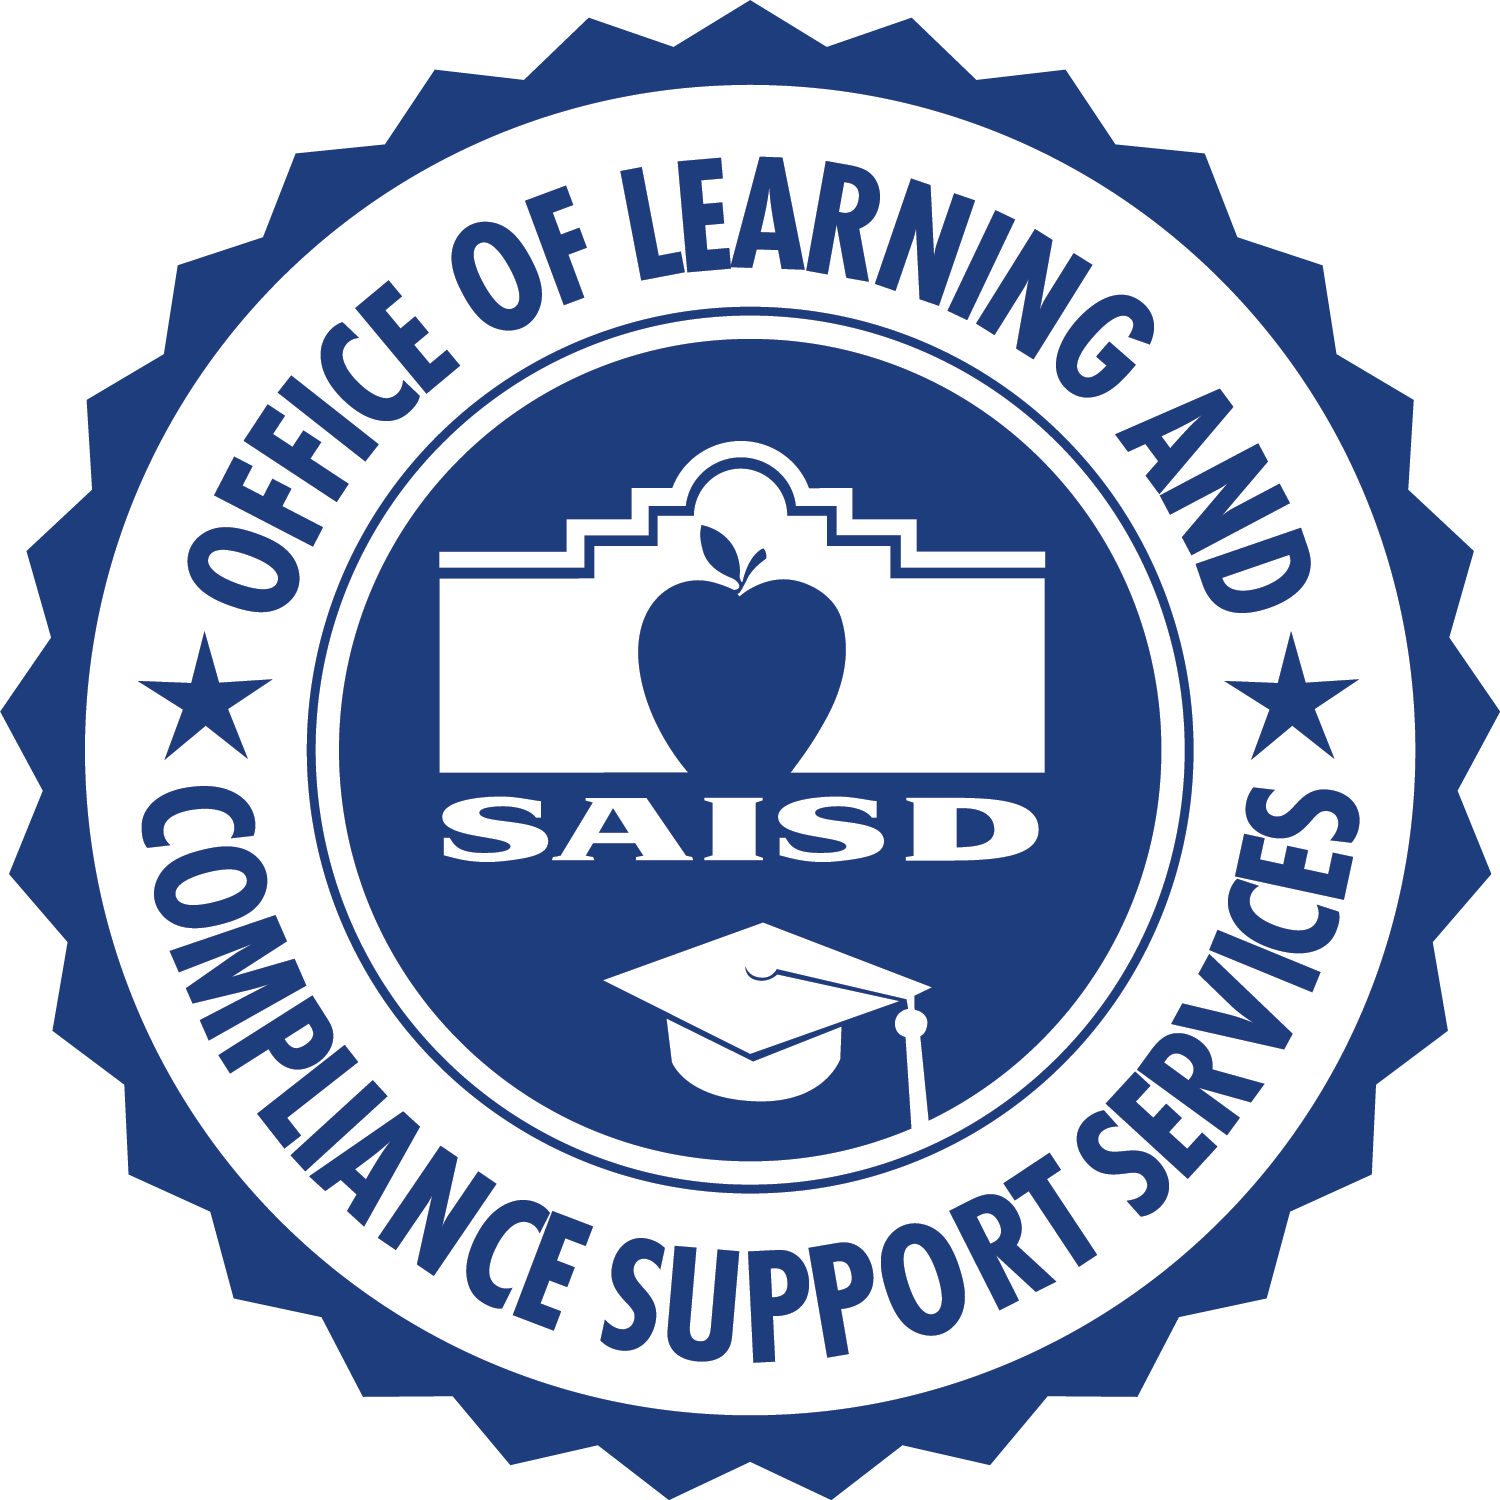 Office of Learning and Compliance Support Services logo